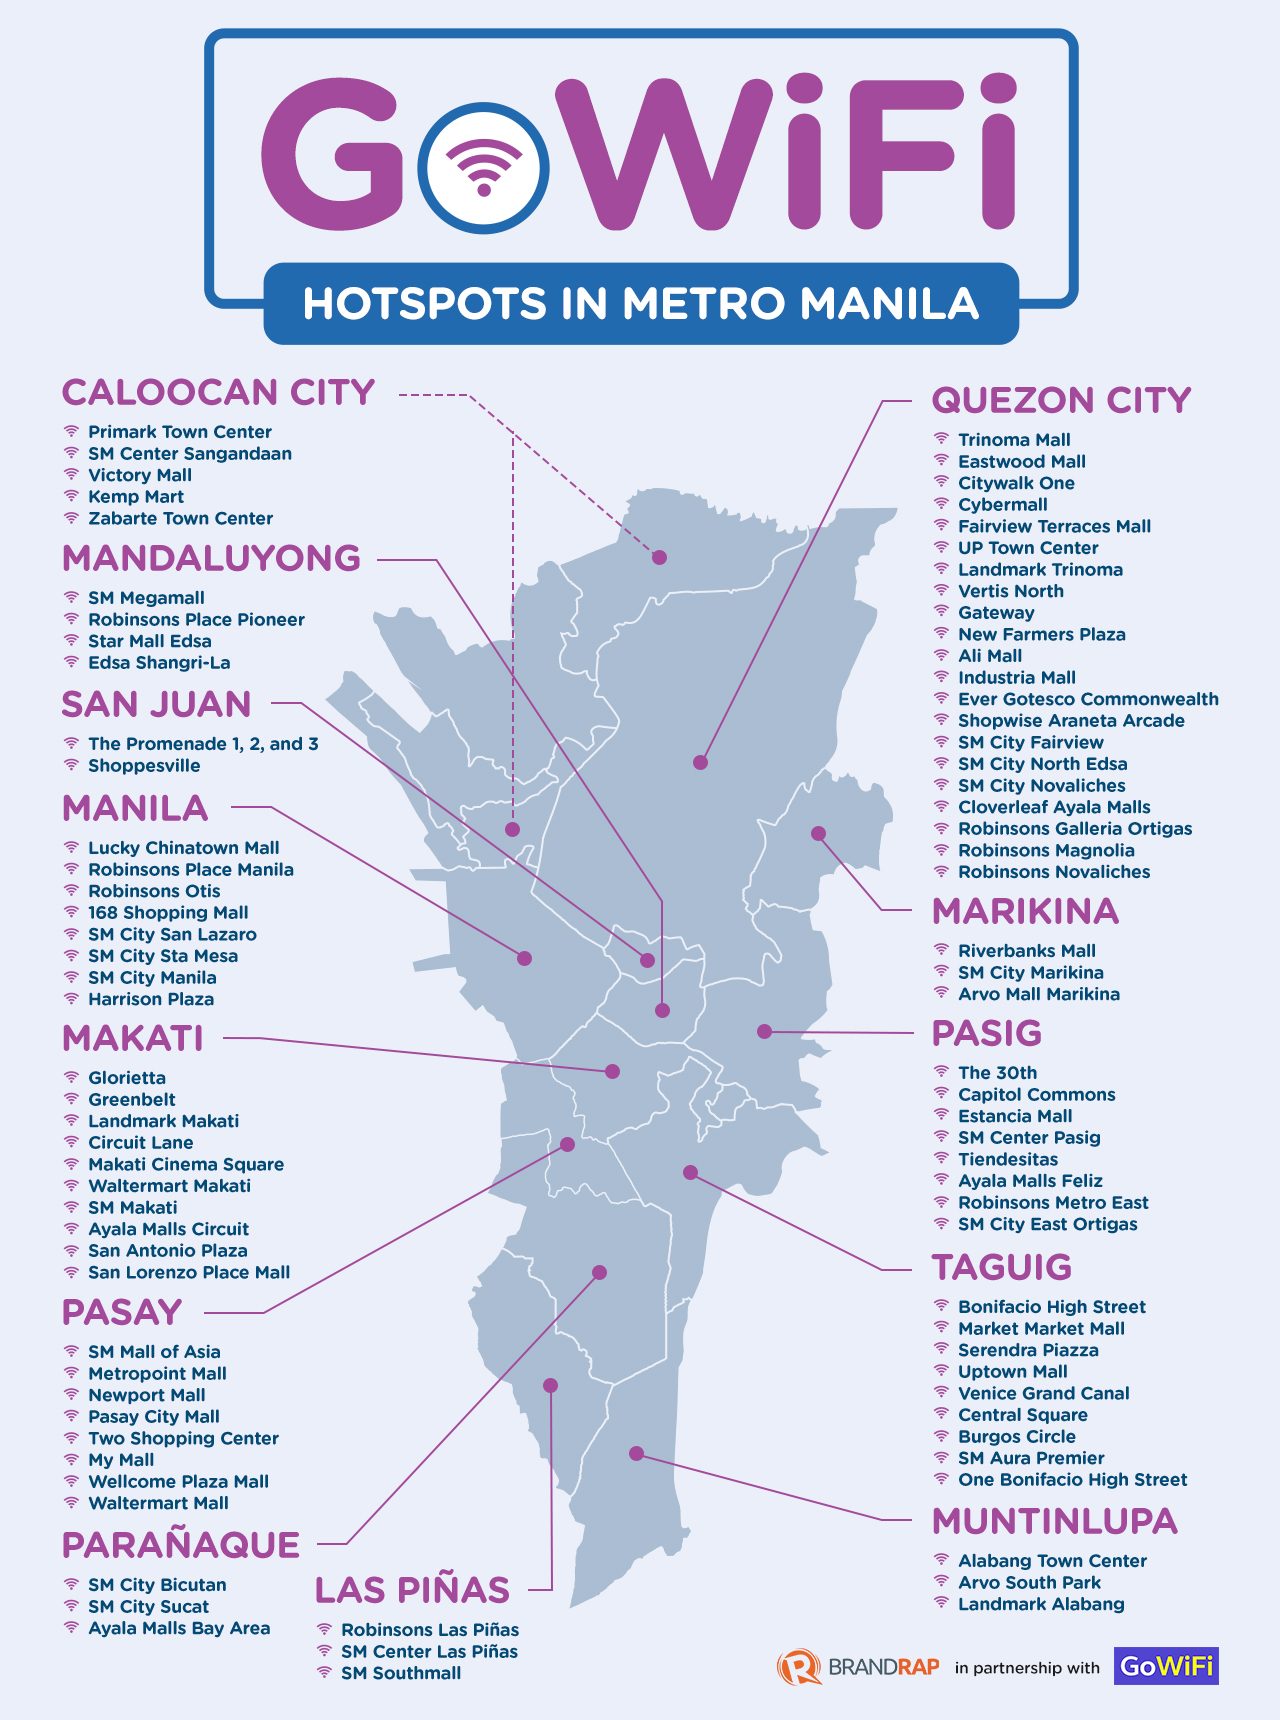 INFOGRAPHIC: Spots in Metro Manila where you can get free Wi-Fi